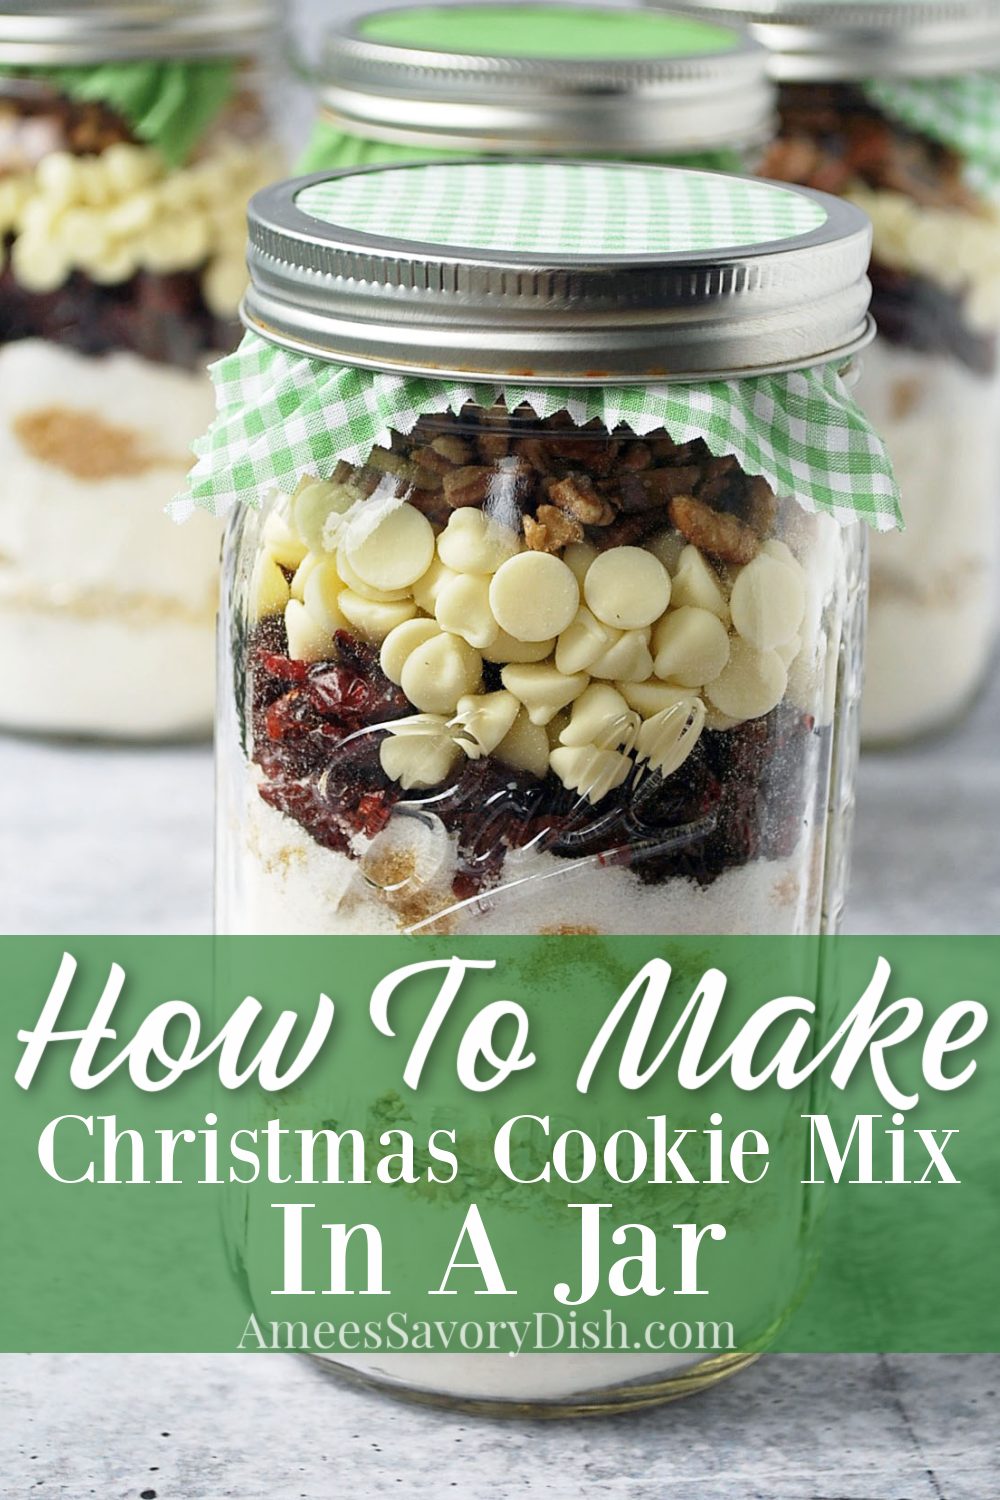 A round-up of delicious Christmas cookie mix in a jar recipes for holiday gift-giving.  Homemade gifts are the best and everyone will love receiving these from-scratch mason jar treats!  #cookiemixinjars #jarcookiemix #masonjarcookies #christmascookies #diygifts #foodiegifts via @Ameessavorydish